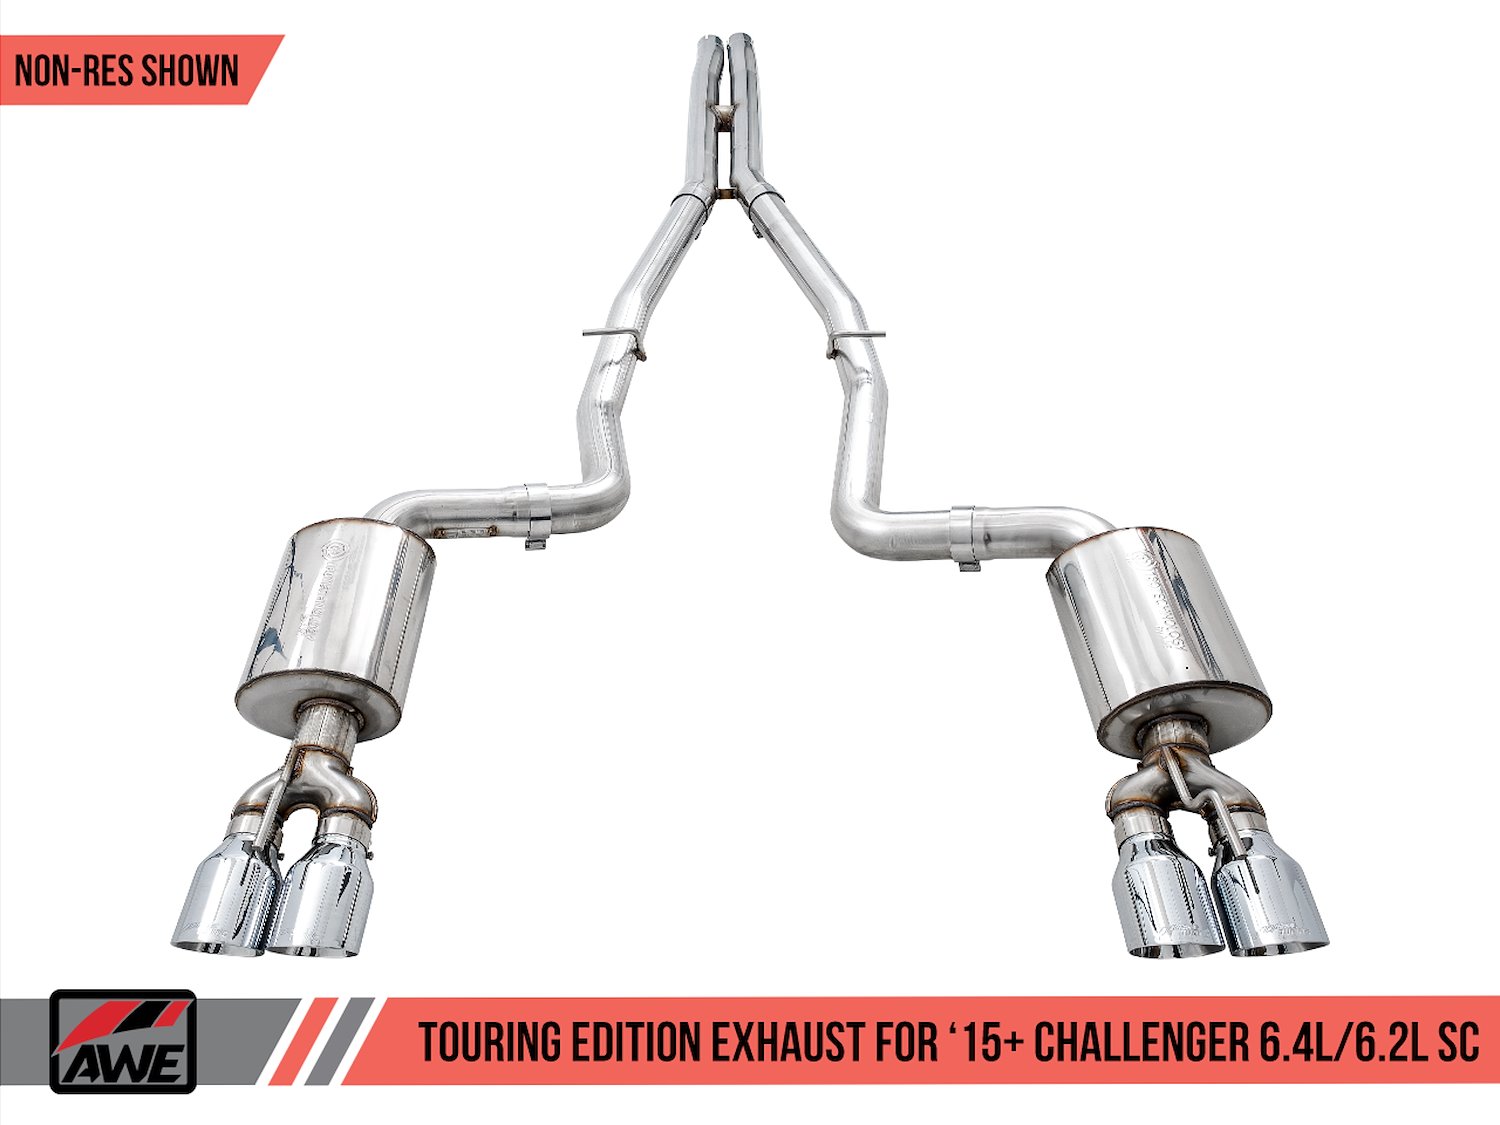 AWE Touring Edition Exhaust for 15+ Challenger 6.4 / 6.2 SC - Non-Resonated - Chrome Silver Quad Tips